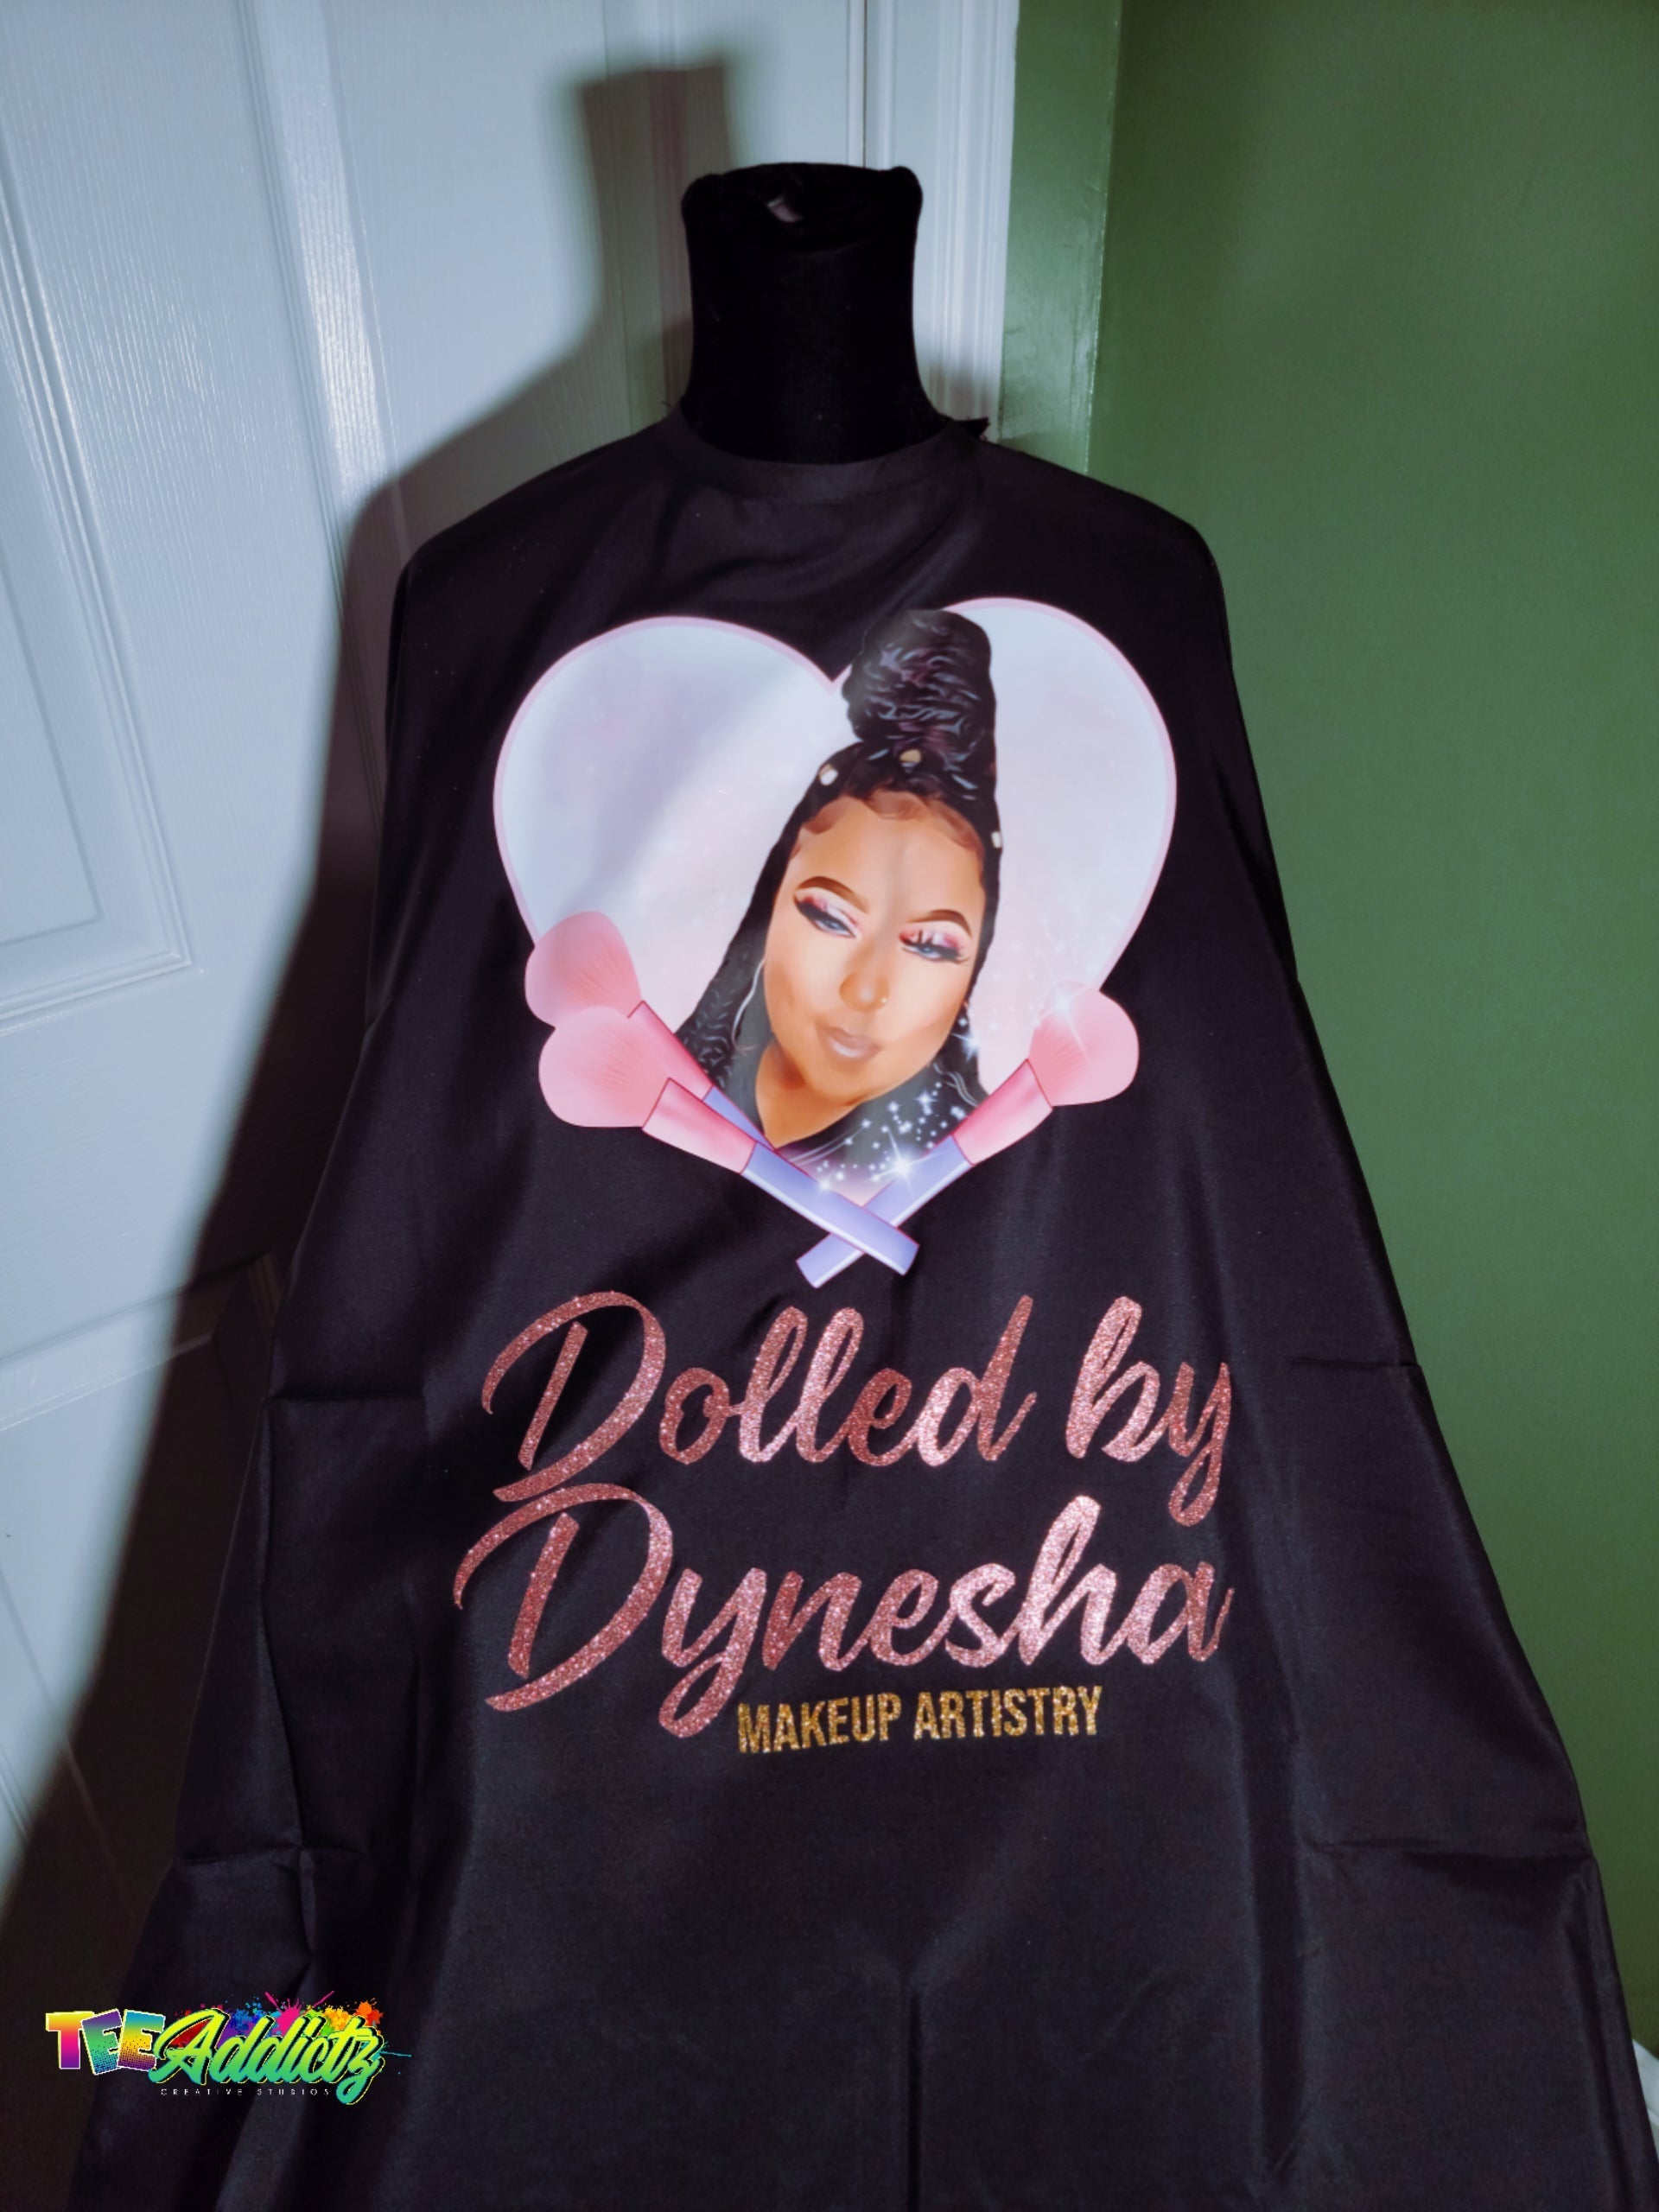 Custom Screen Printed Capes, Aprons, and Jackets for salons